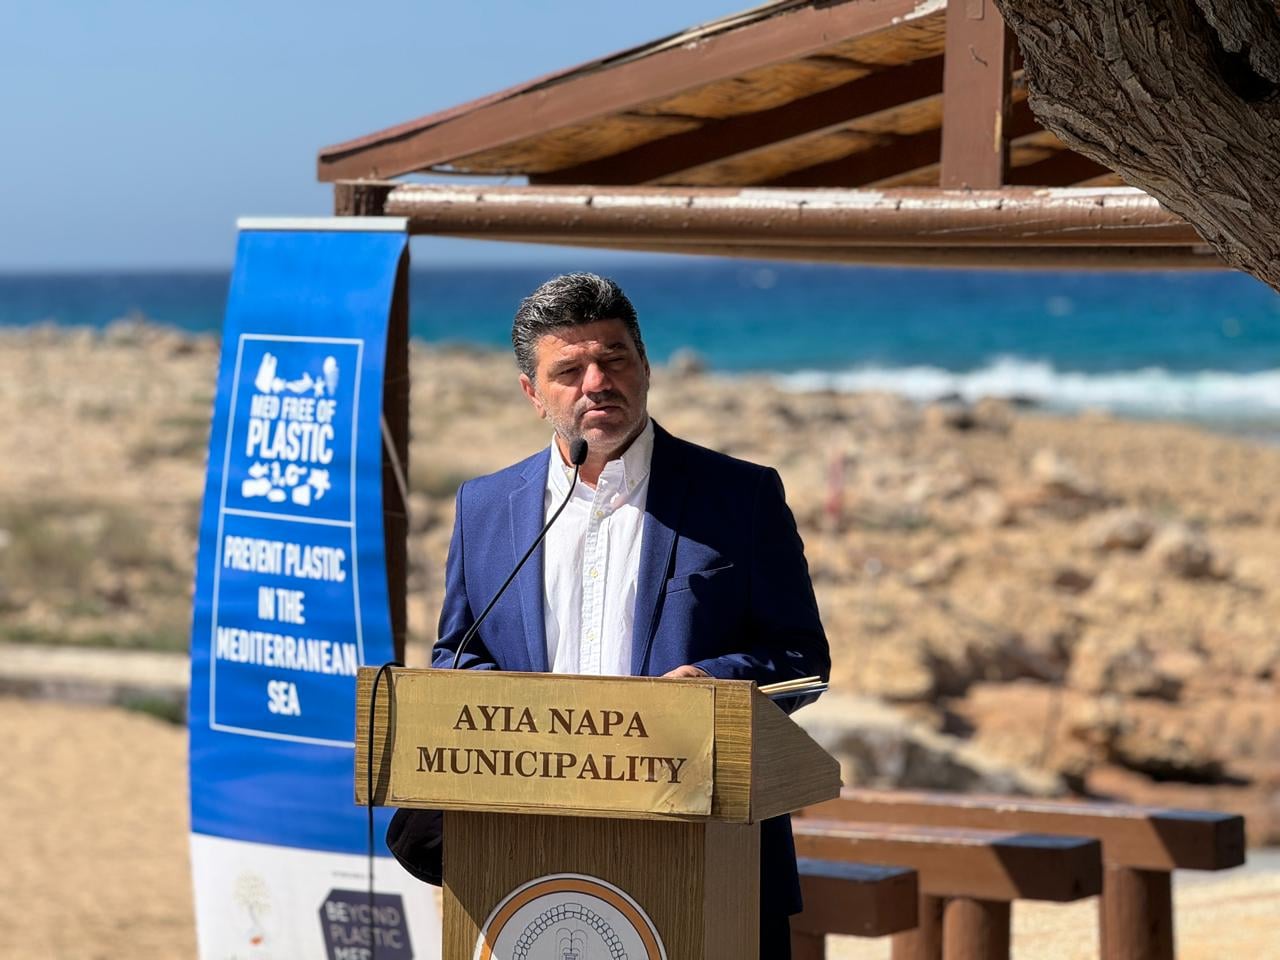 Ayia Napa mayor to stay in post during criminal investigation